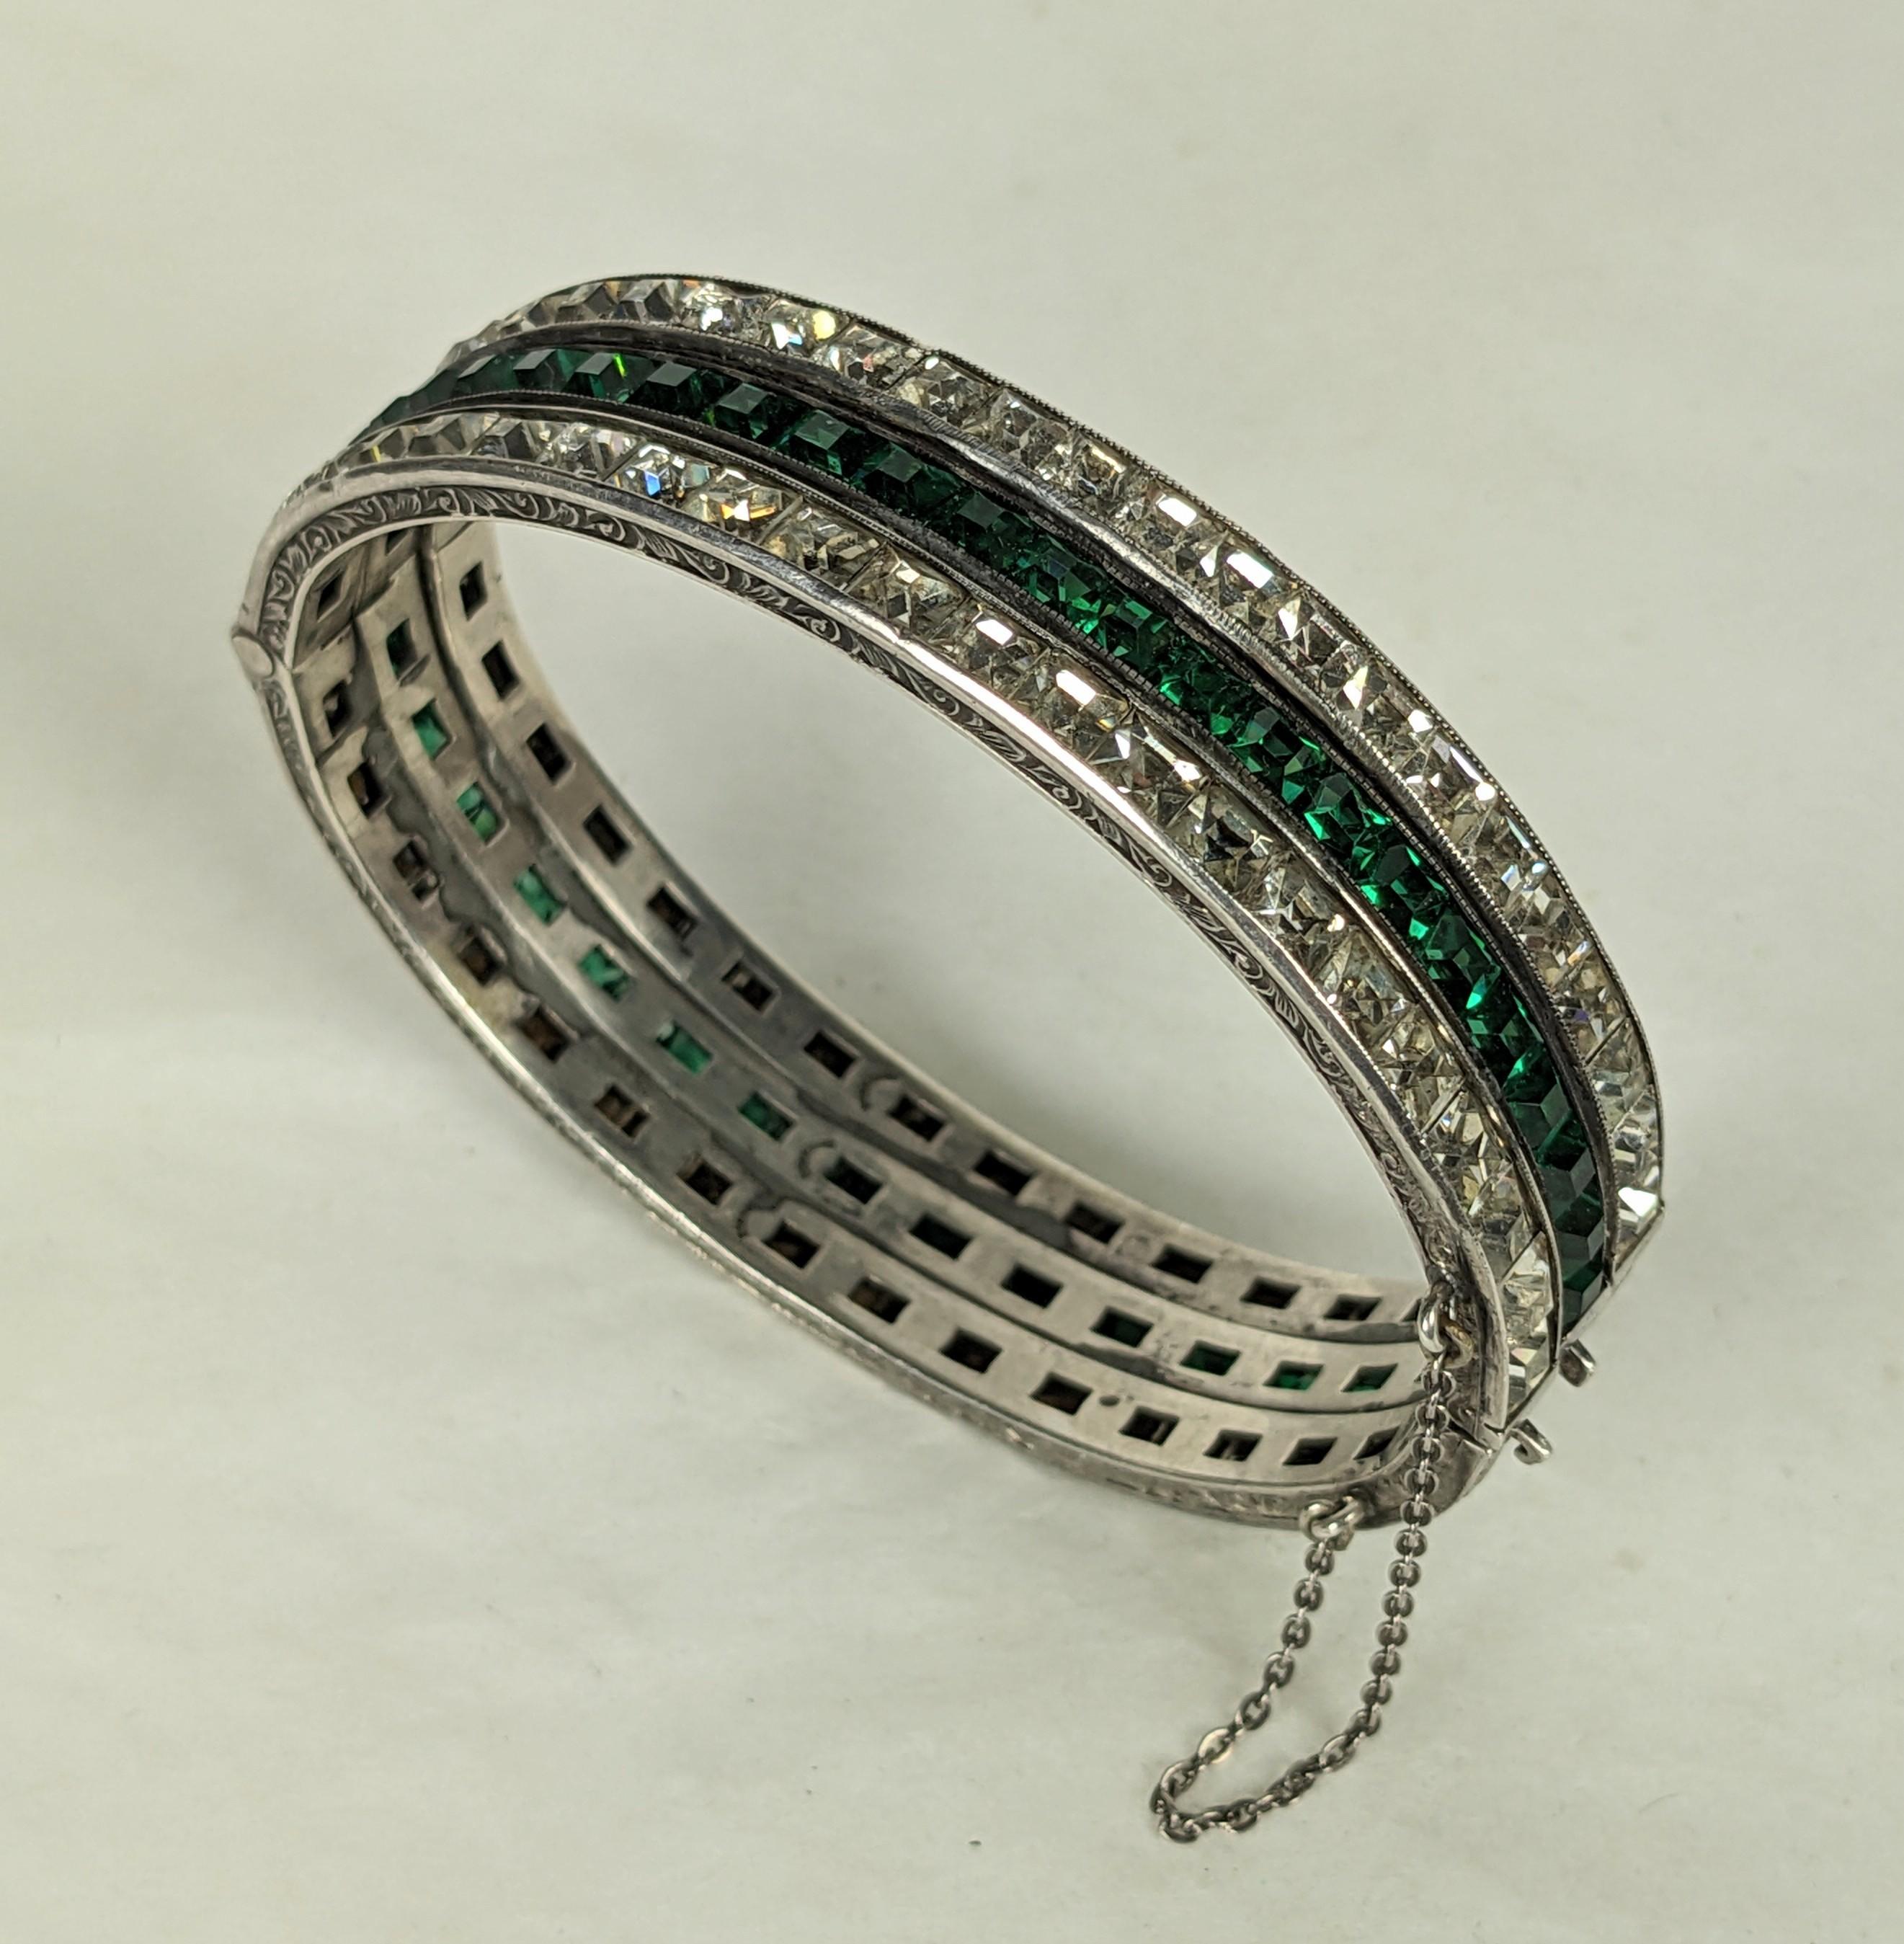 Unusual Art Deco Channel Set Bangle from the 1930's. A series of 3 identical sterling bangles in crystal and emerald were soldered together to form one wider bangle in the period. Very well done, not noticeable that was 3 bangles.
There are 3 clasps